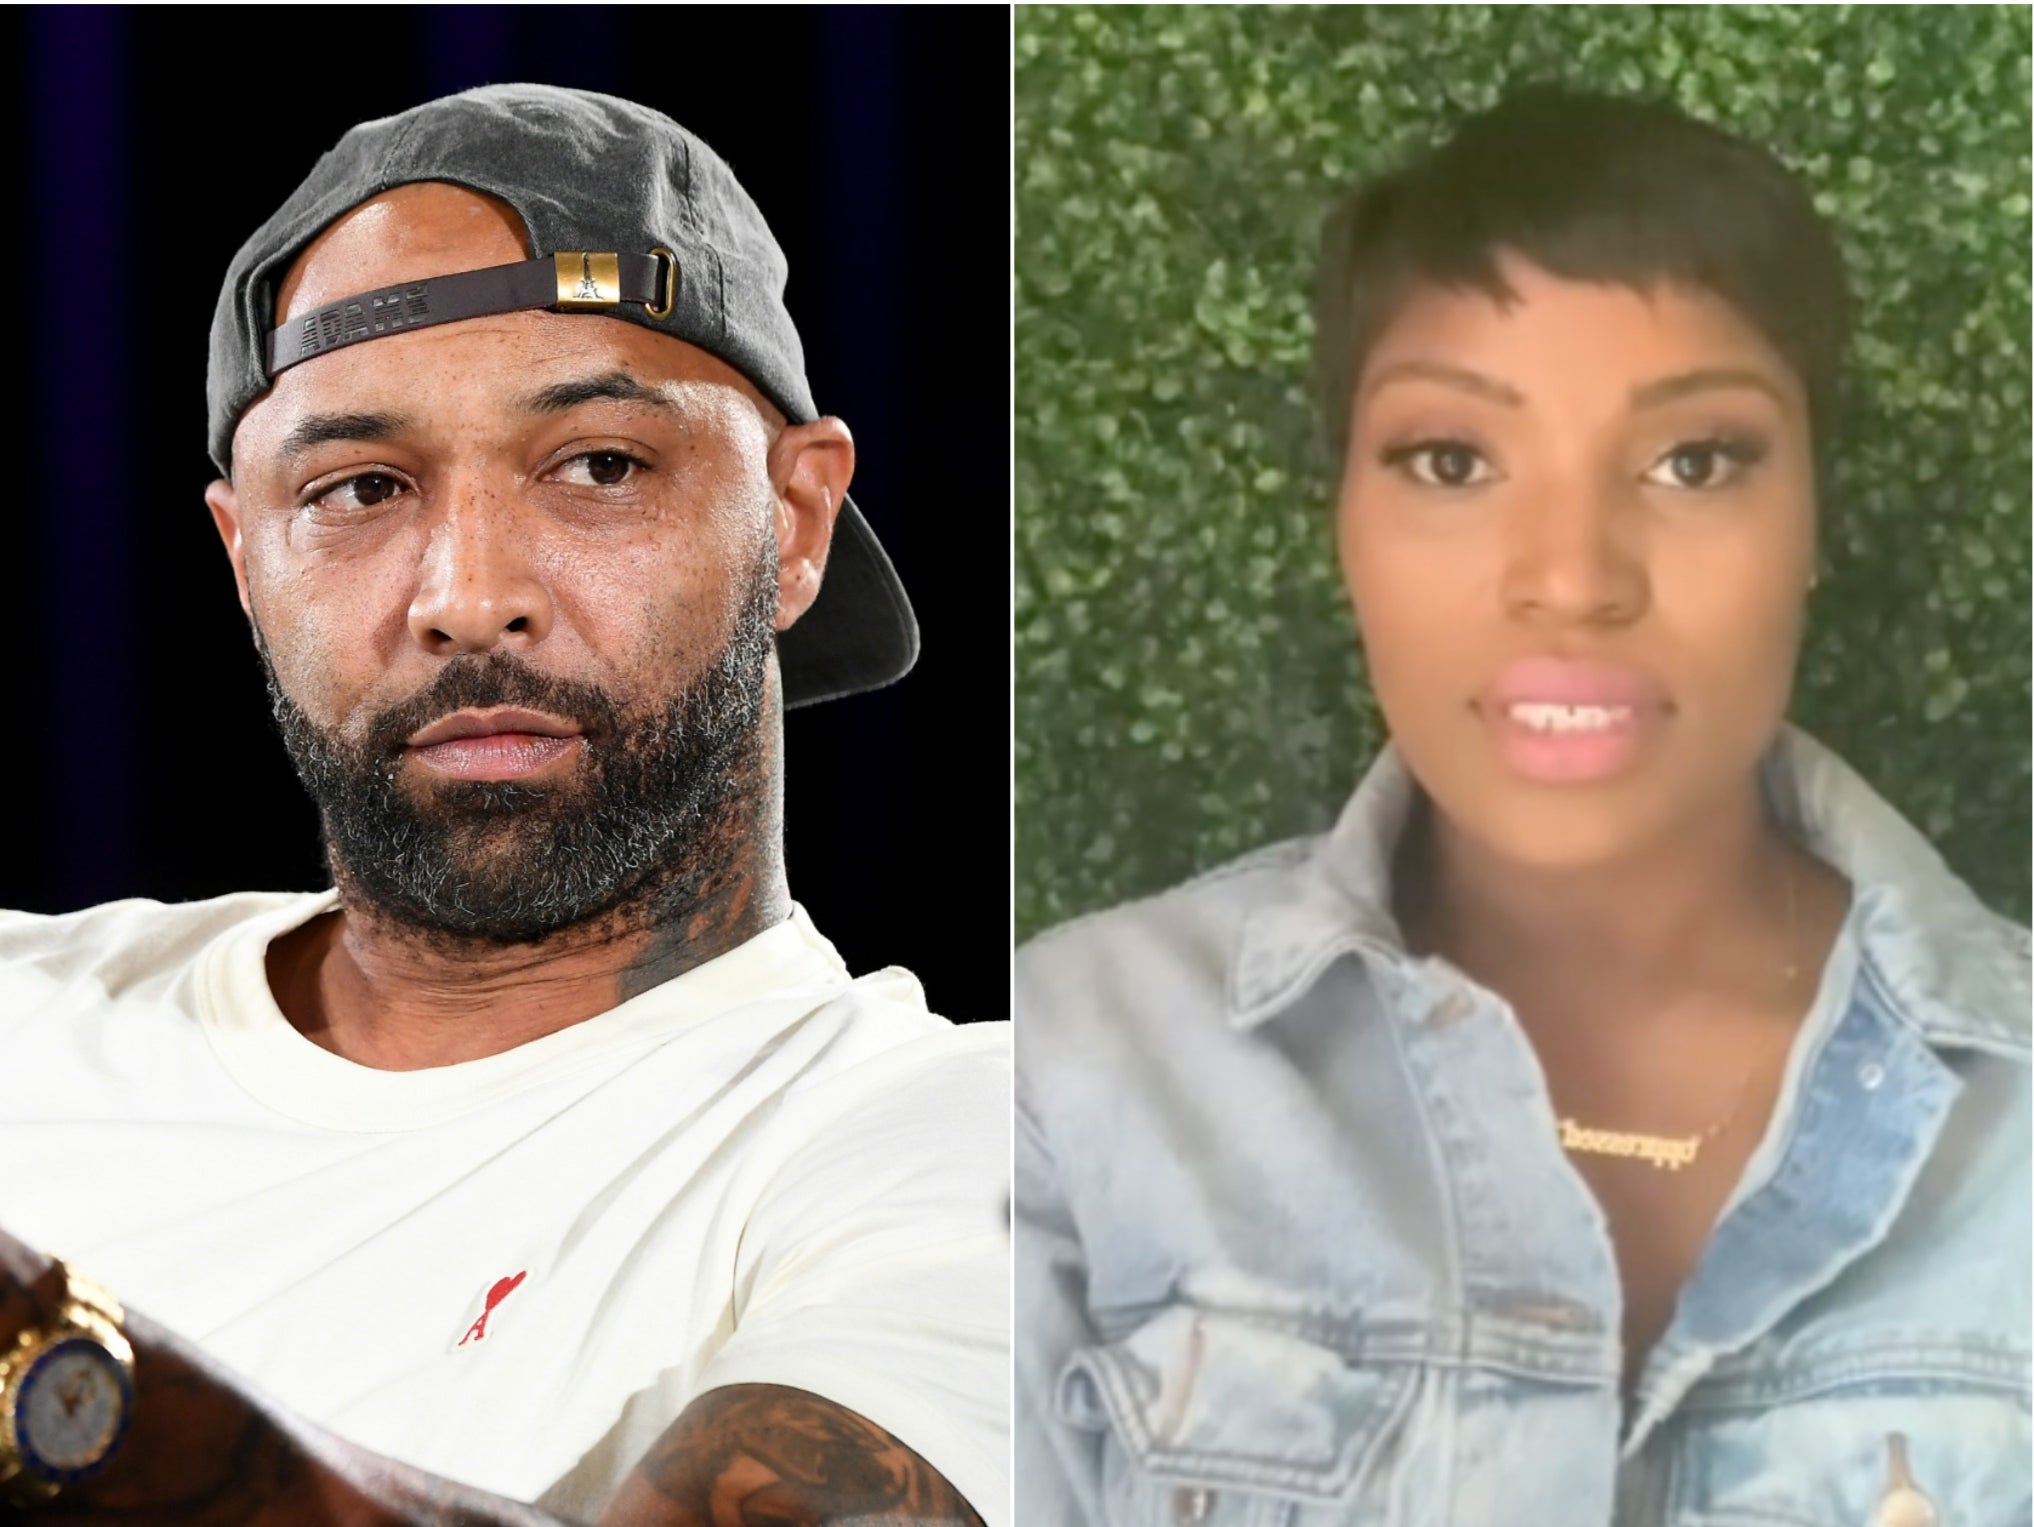 Olivia Dope (right) claimed Joe Budden (left) sexually harassed her during the recording of a podcast